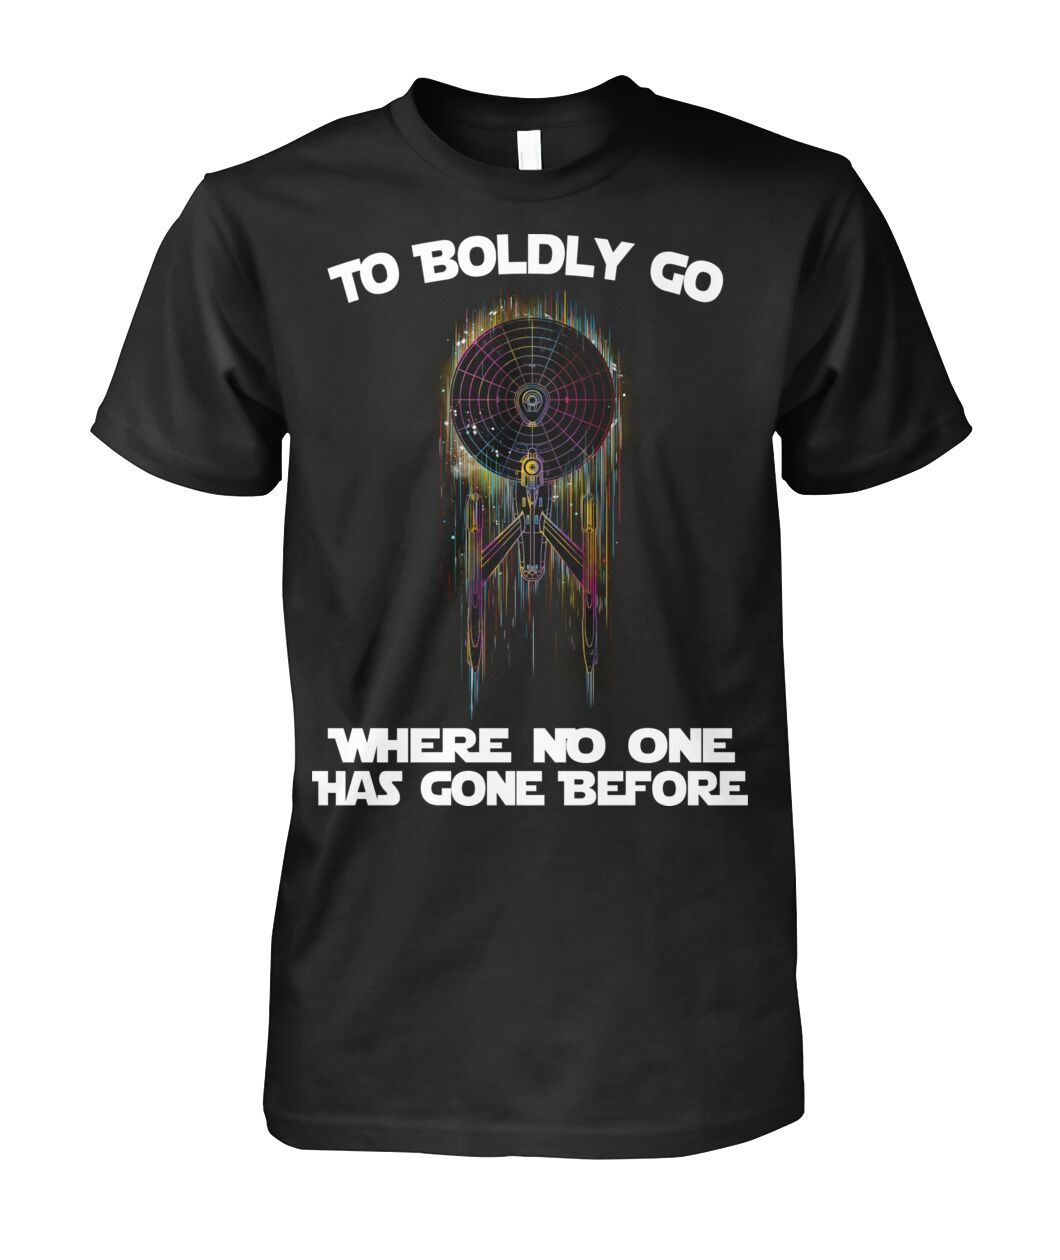 star trek to boldly go where no one has gone before shirt 1